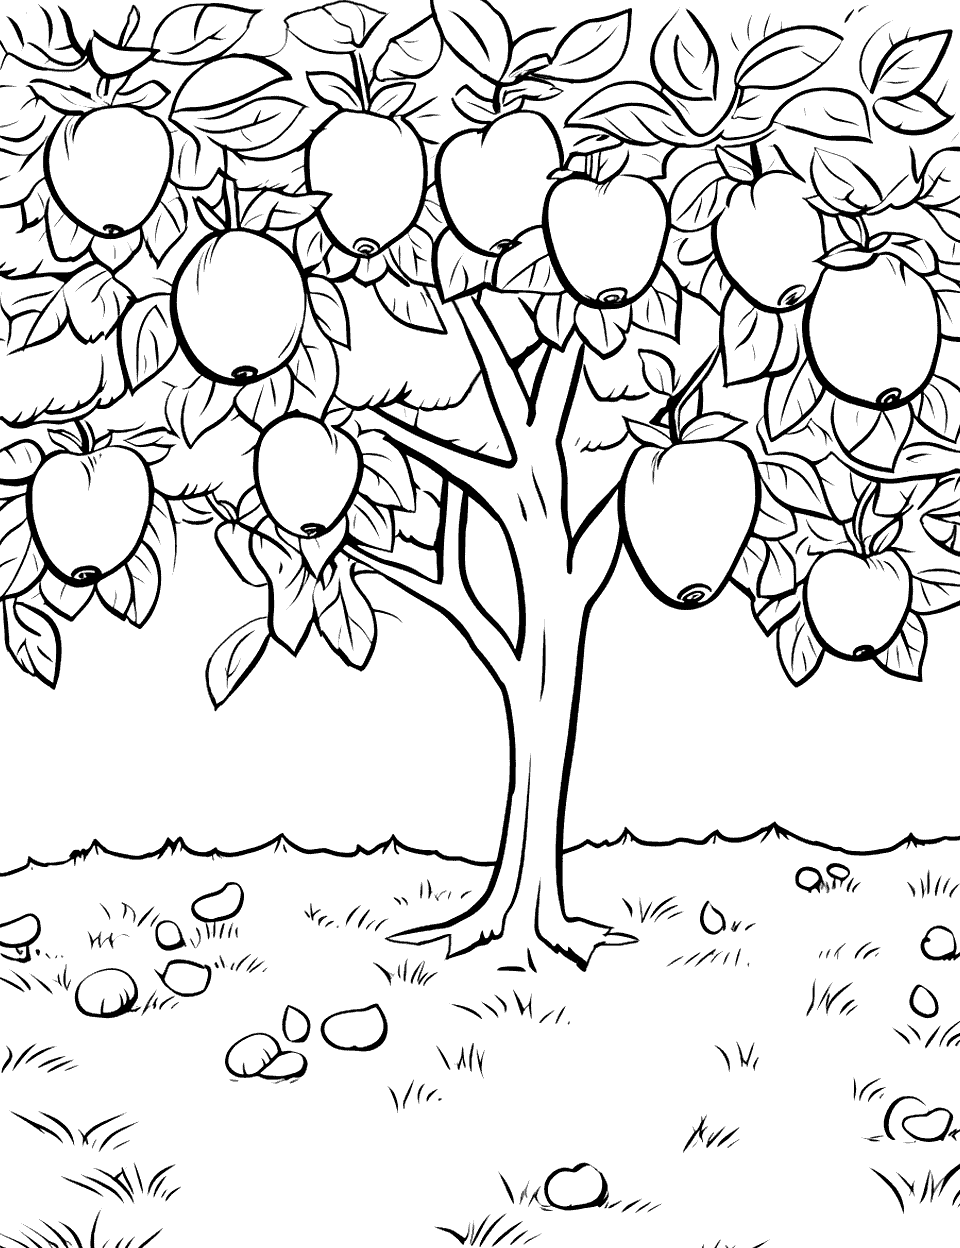 Fruit Tree Coloring Page - A fruit tree with ripe fruits hanging from the branches.